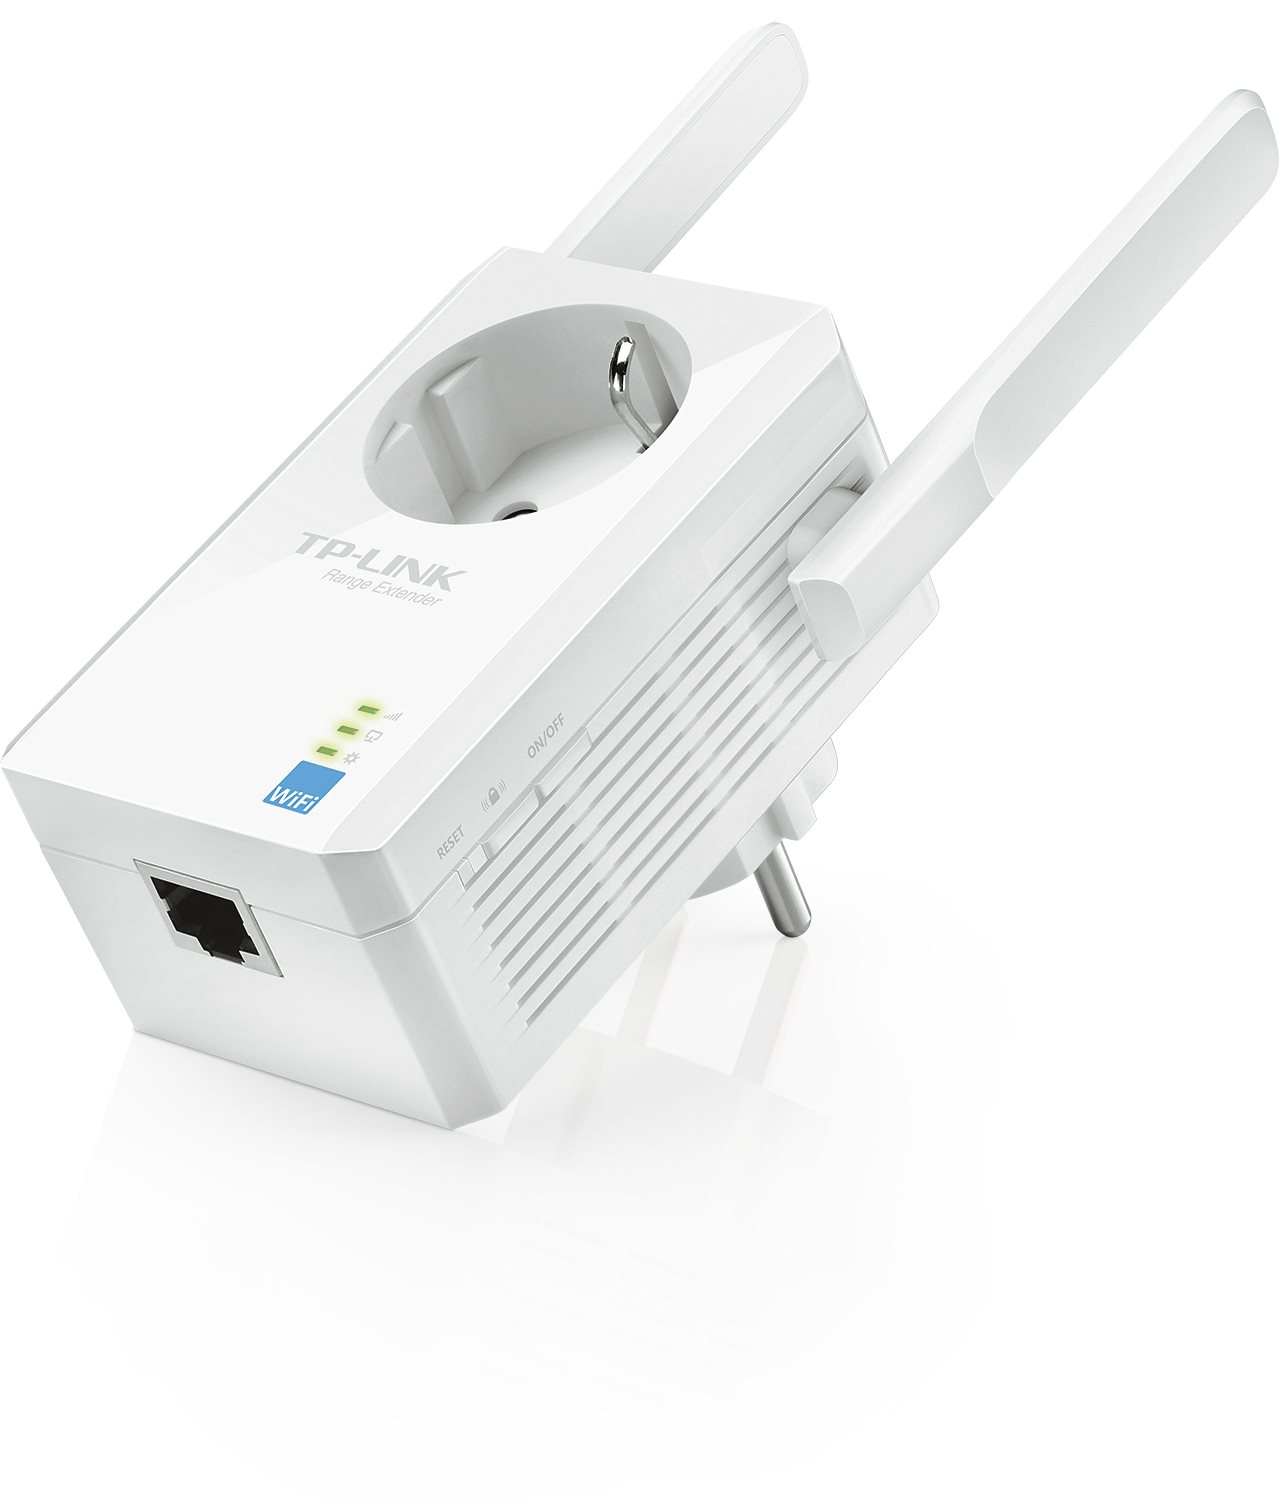 WiFi extender TP-Link TL-WA860RE Extender/Repeater - 300 Mbps